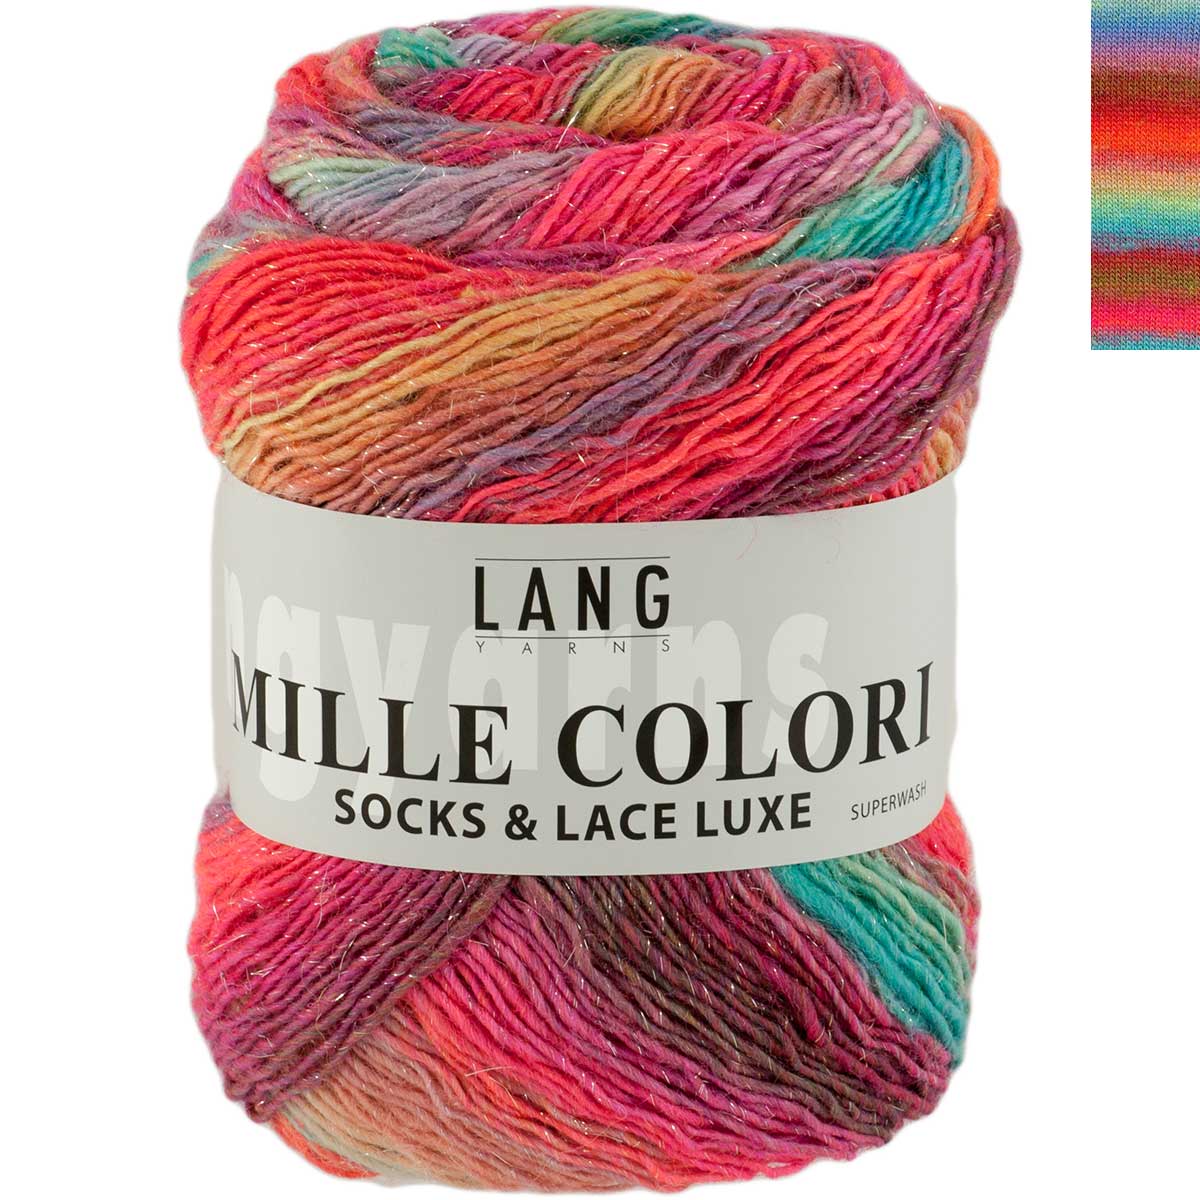 Lang Yarns Mille Colori Socks & Lace Luxe Farbe 51